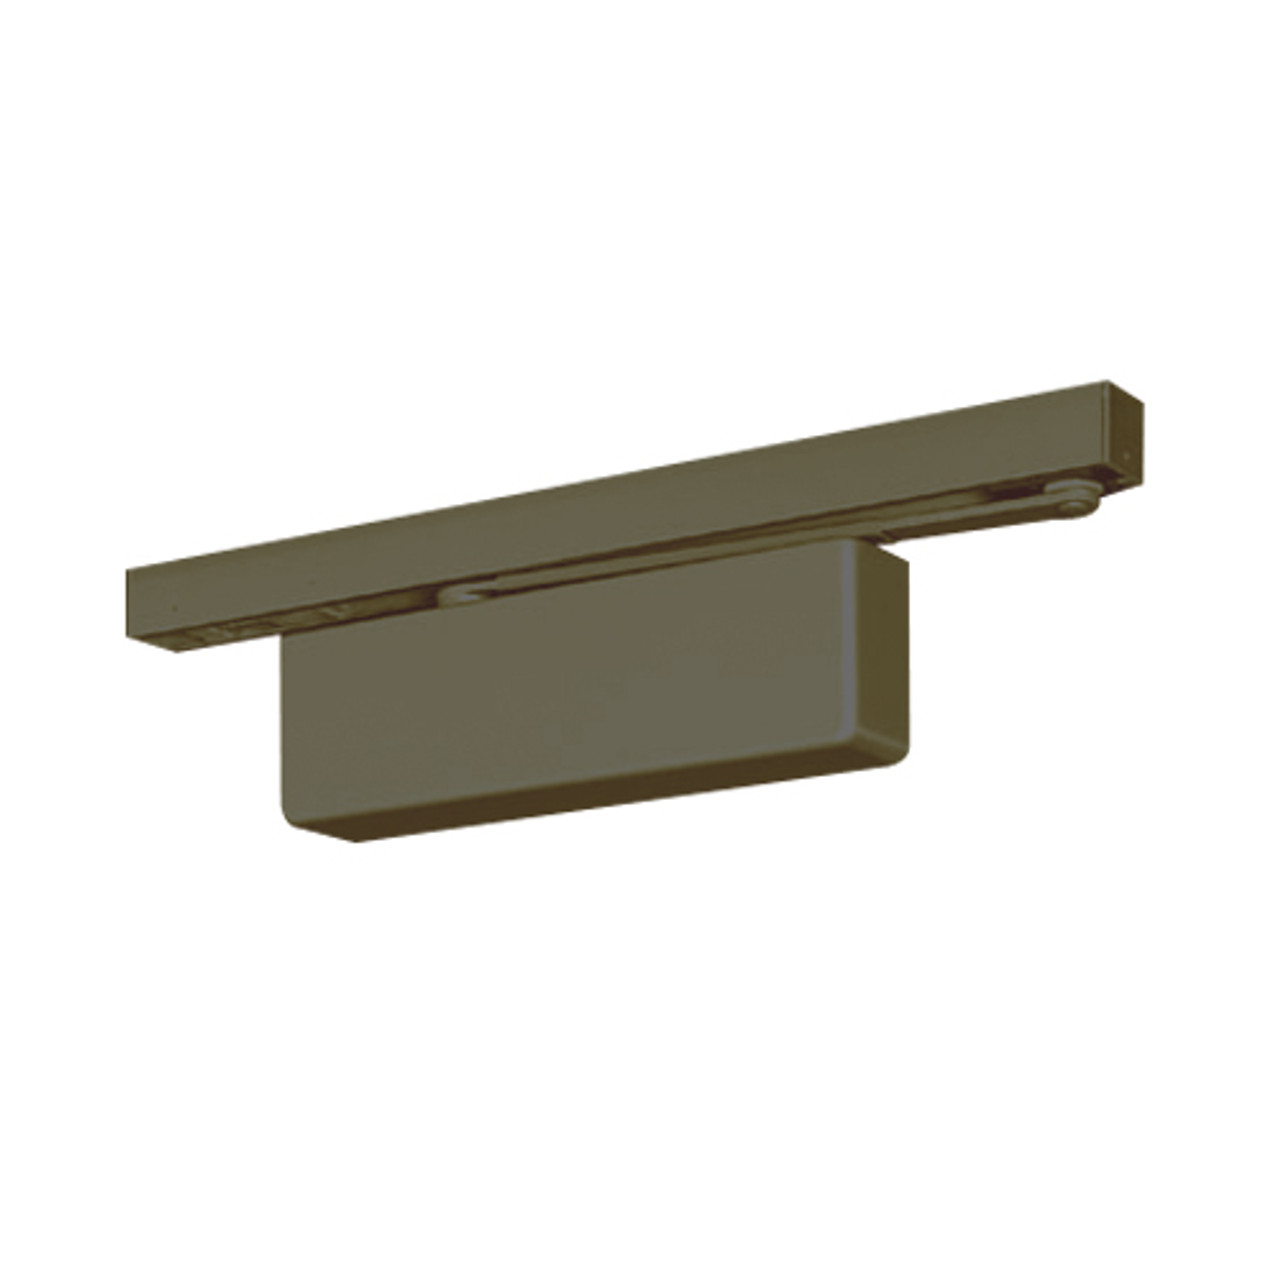 P4400ST-694 Yale 4400 Series Institutional Door Closer with Push Side Slide Track Arm in Medium Bronze